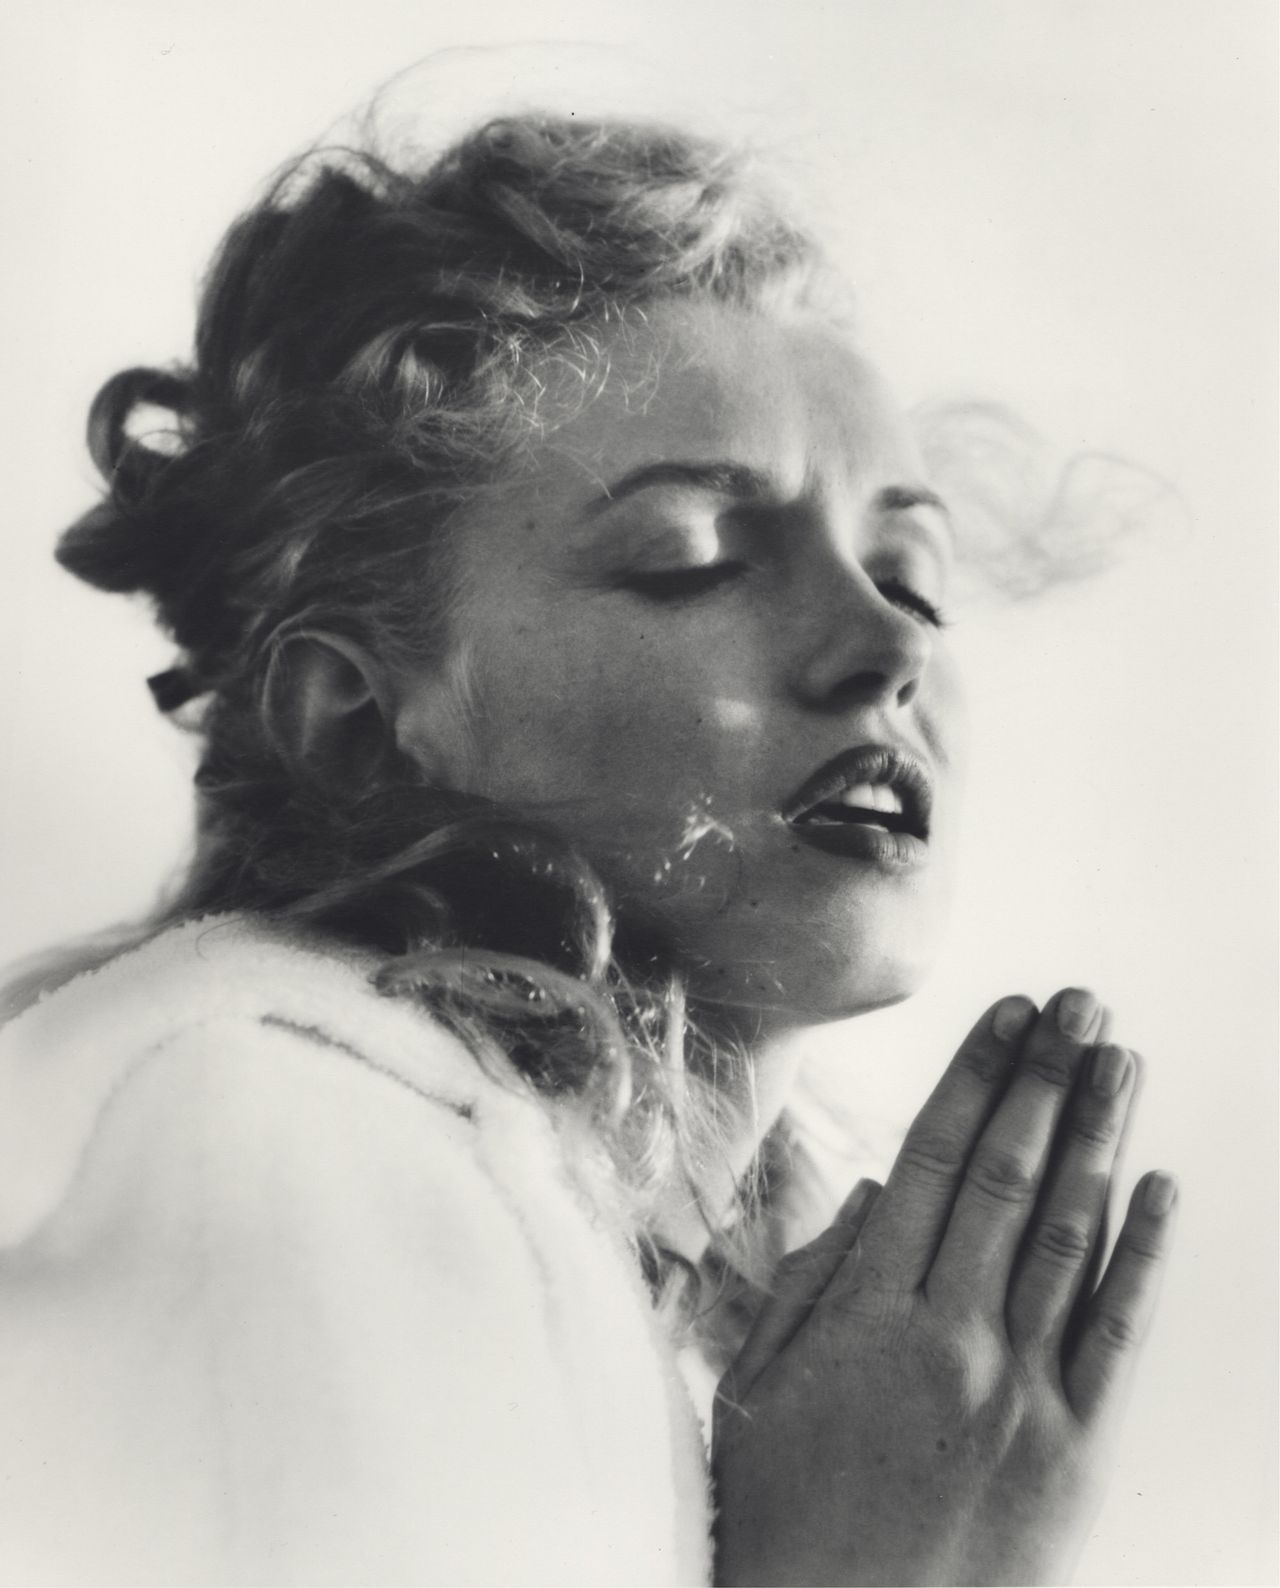 In 1945, Andre de Dienes was the first professional photographer to work with Monroe when she was known simply as Norma Jeane.